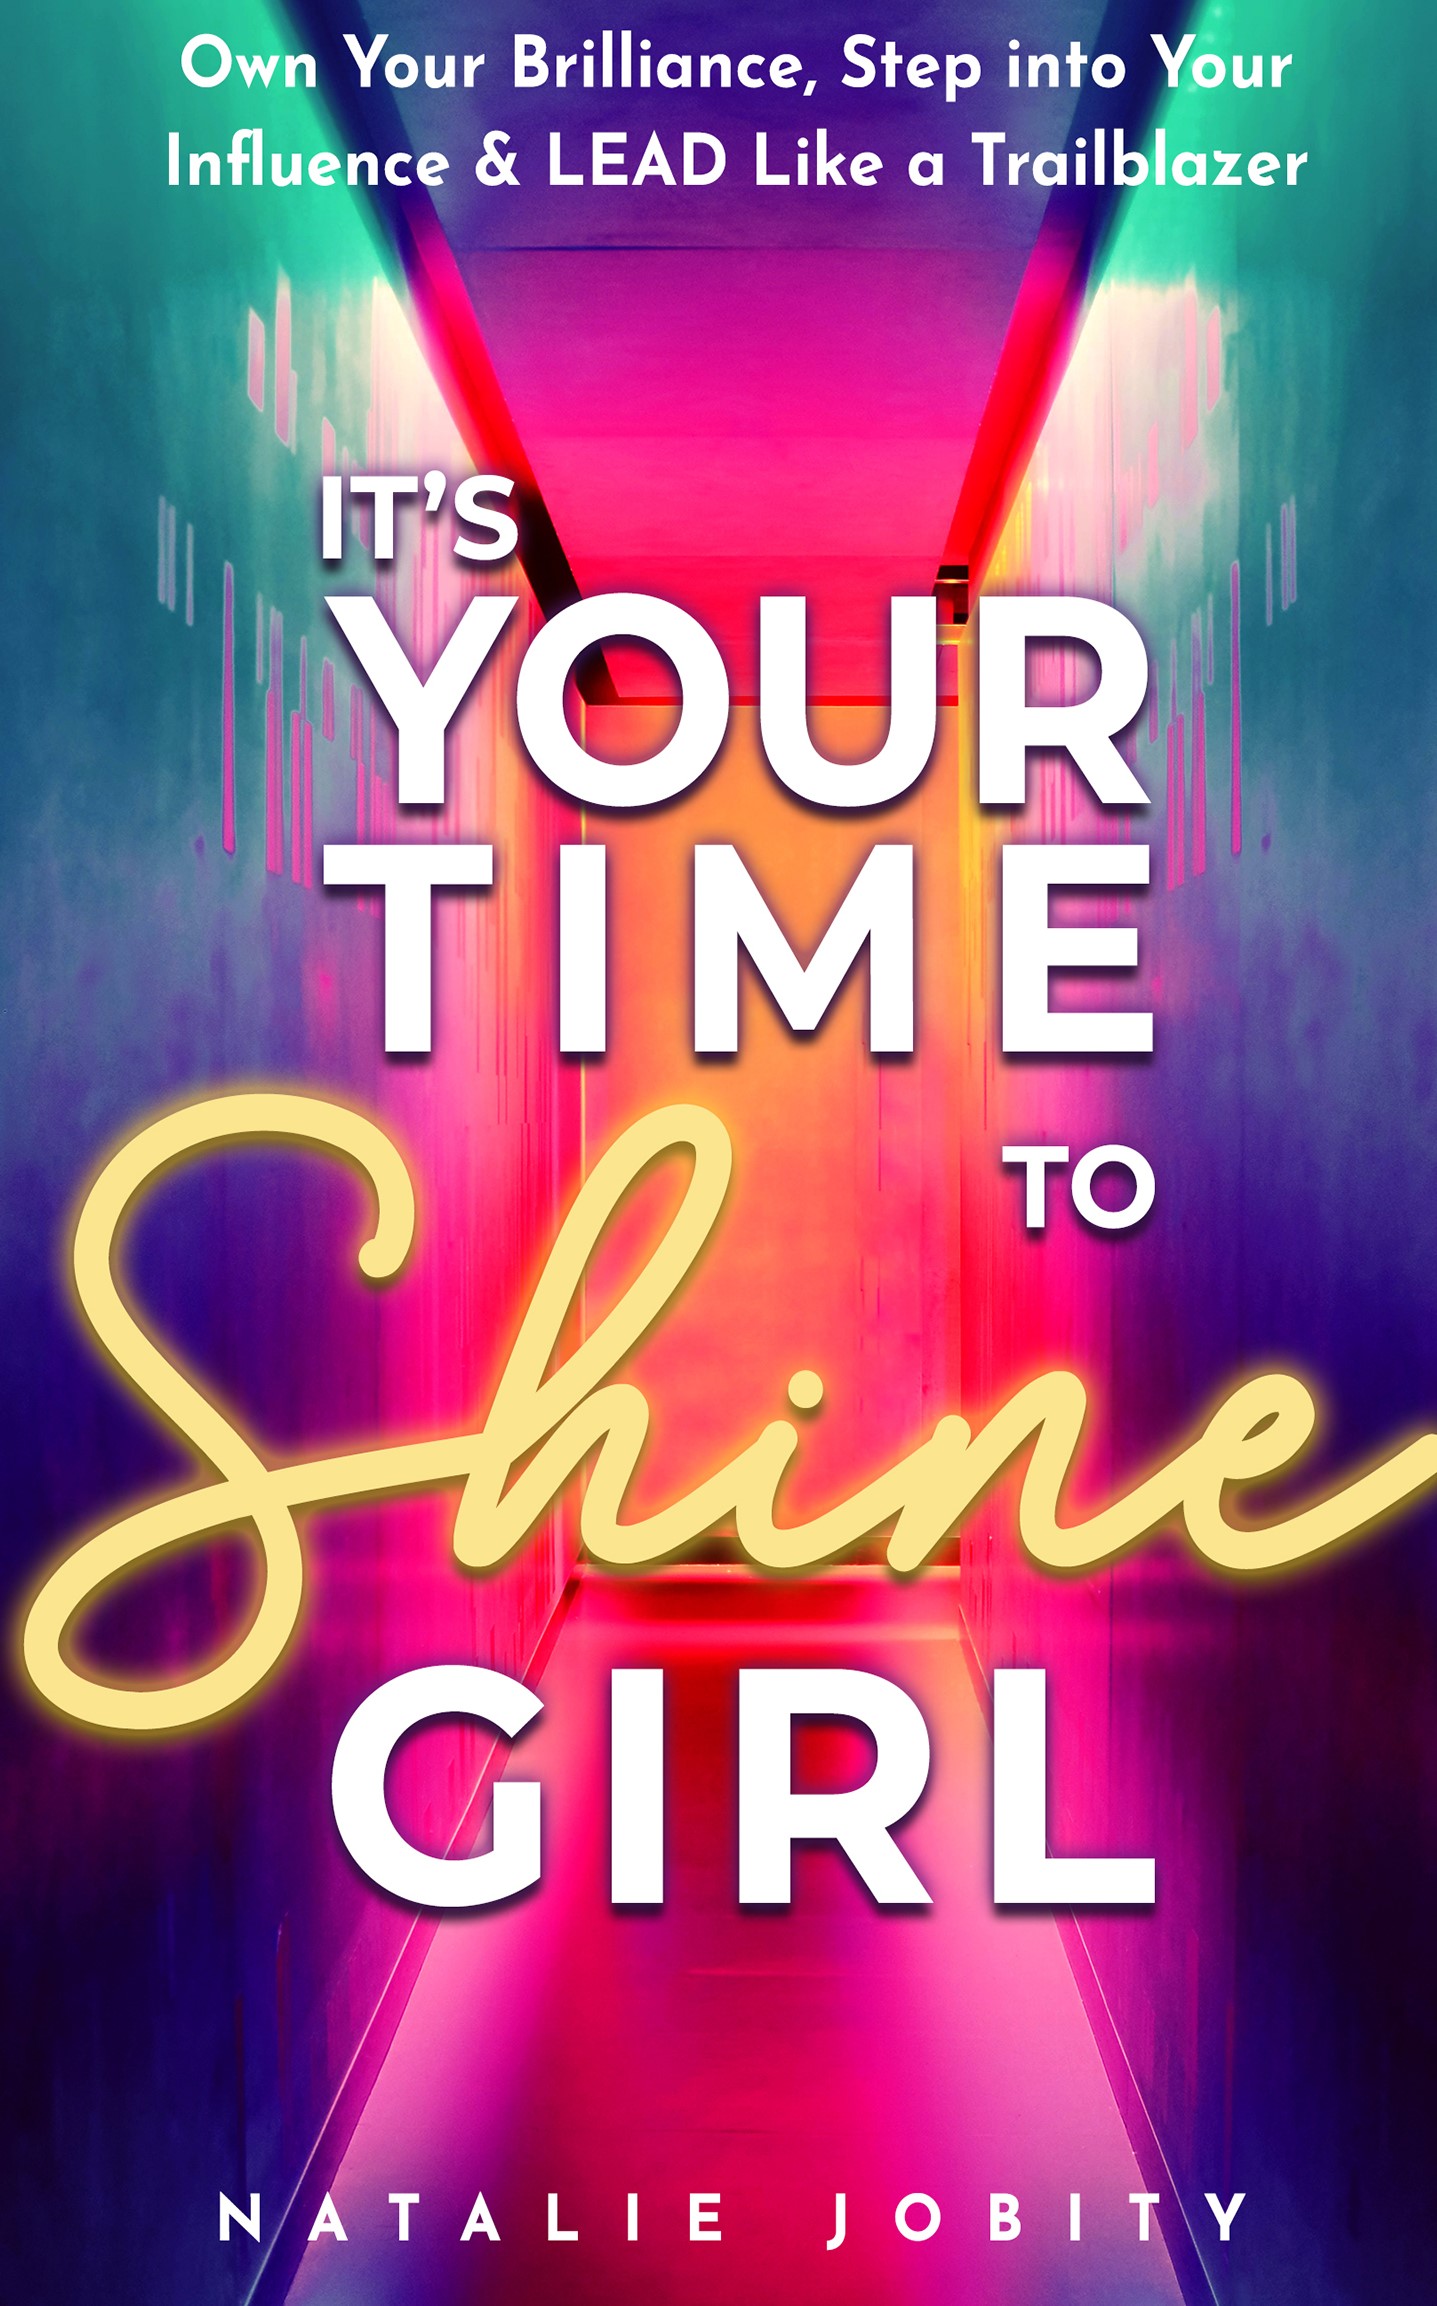 FREE: It’s Your Time to Shine Girl: Own Your Brilliance, Step into Your Influence, & Lead Like a Trailblazer by Natalie Jobity